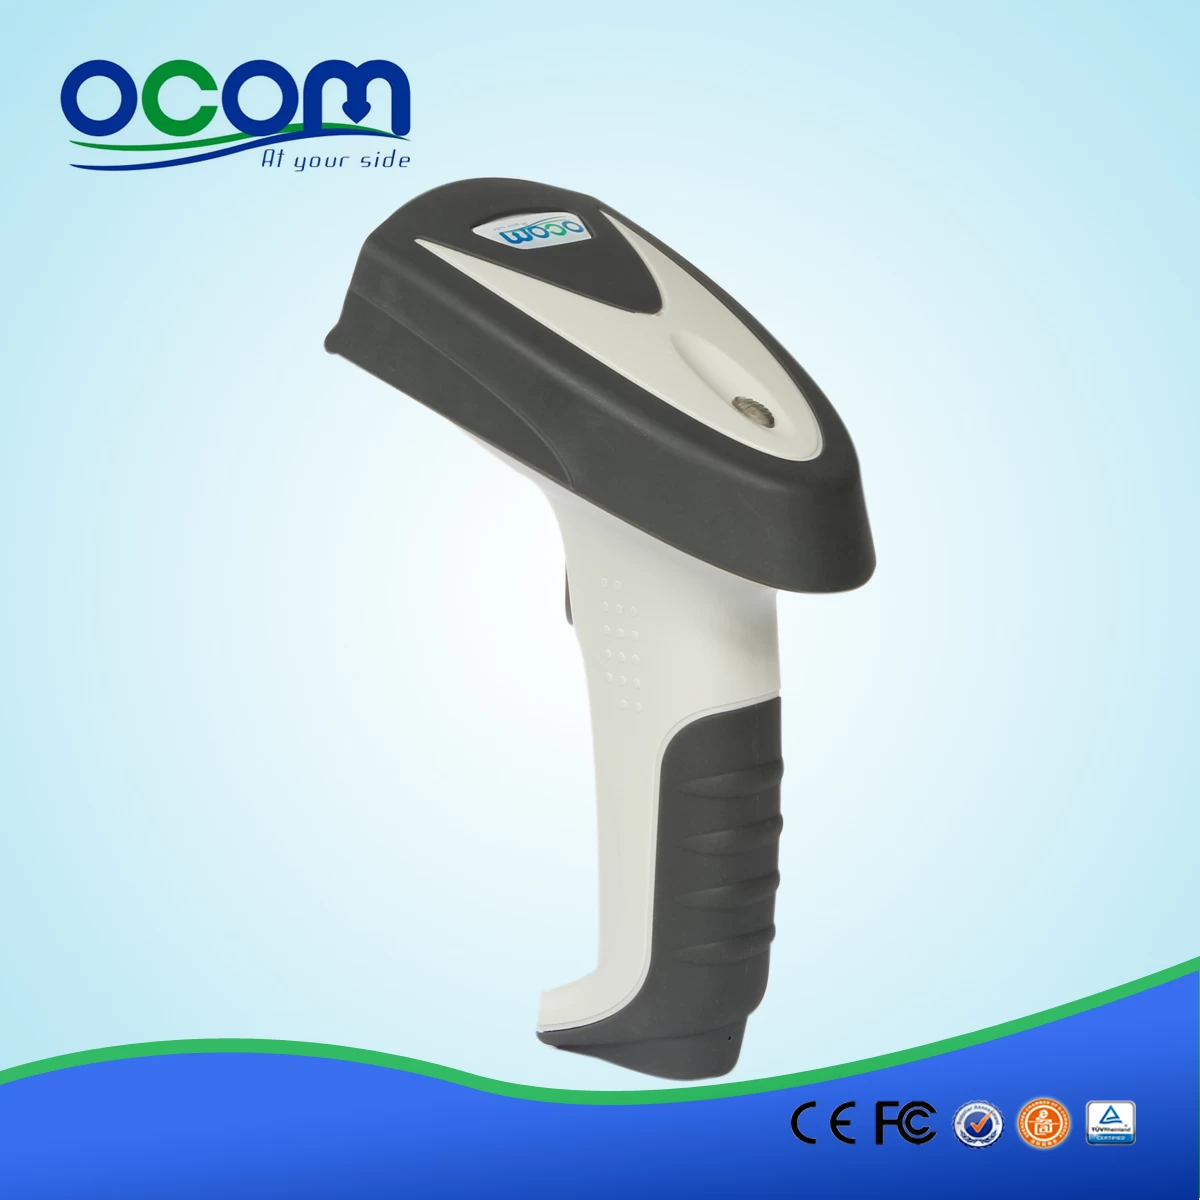 China factory made 1/2d barcode scanner -OCBS-2002